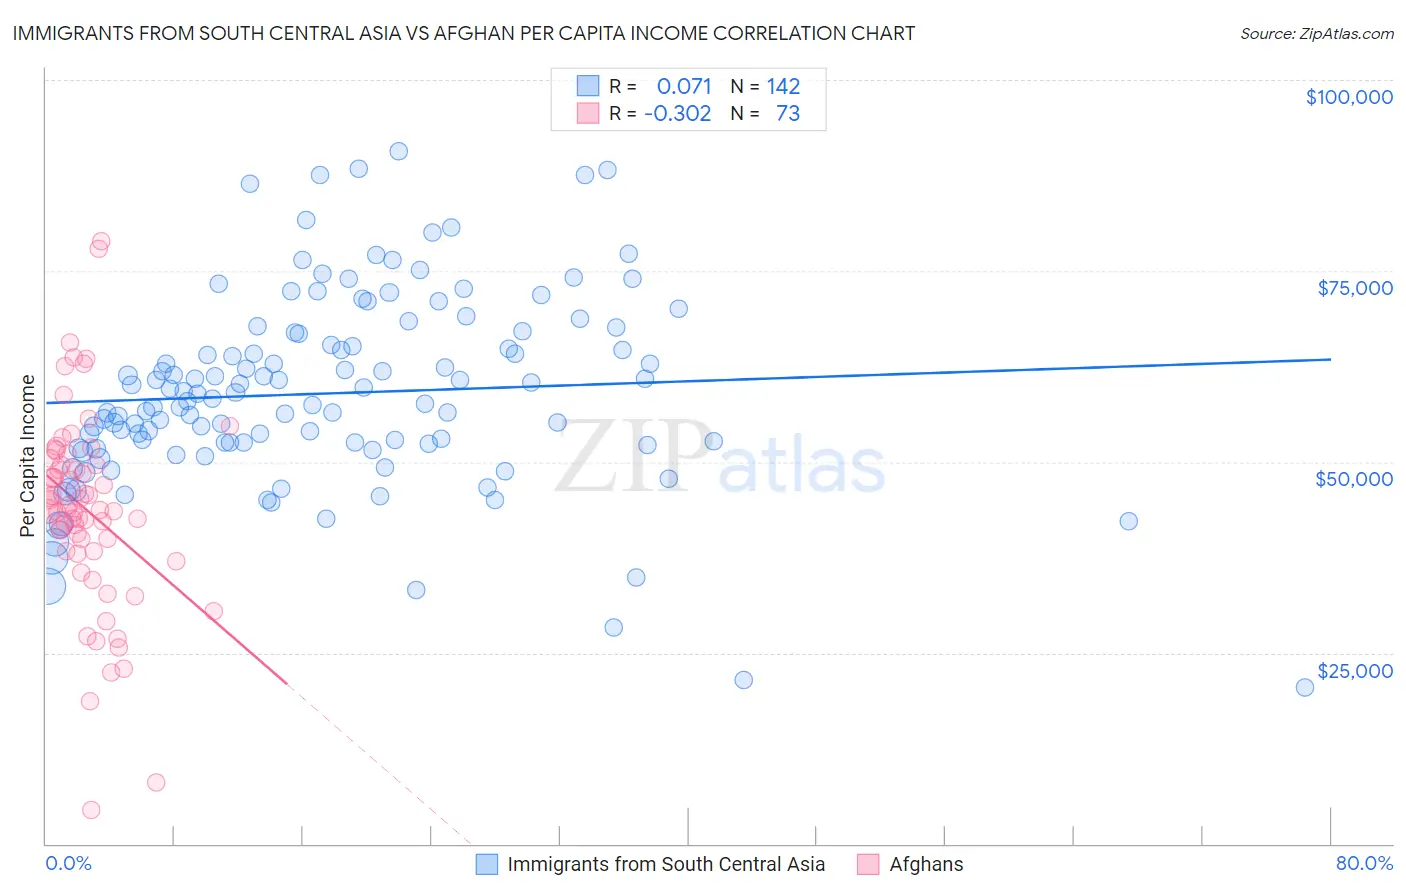 Immigrants from South Central Asia vs Afghan Per Capita Income